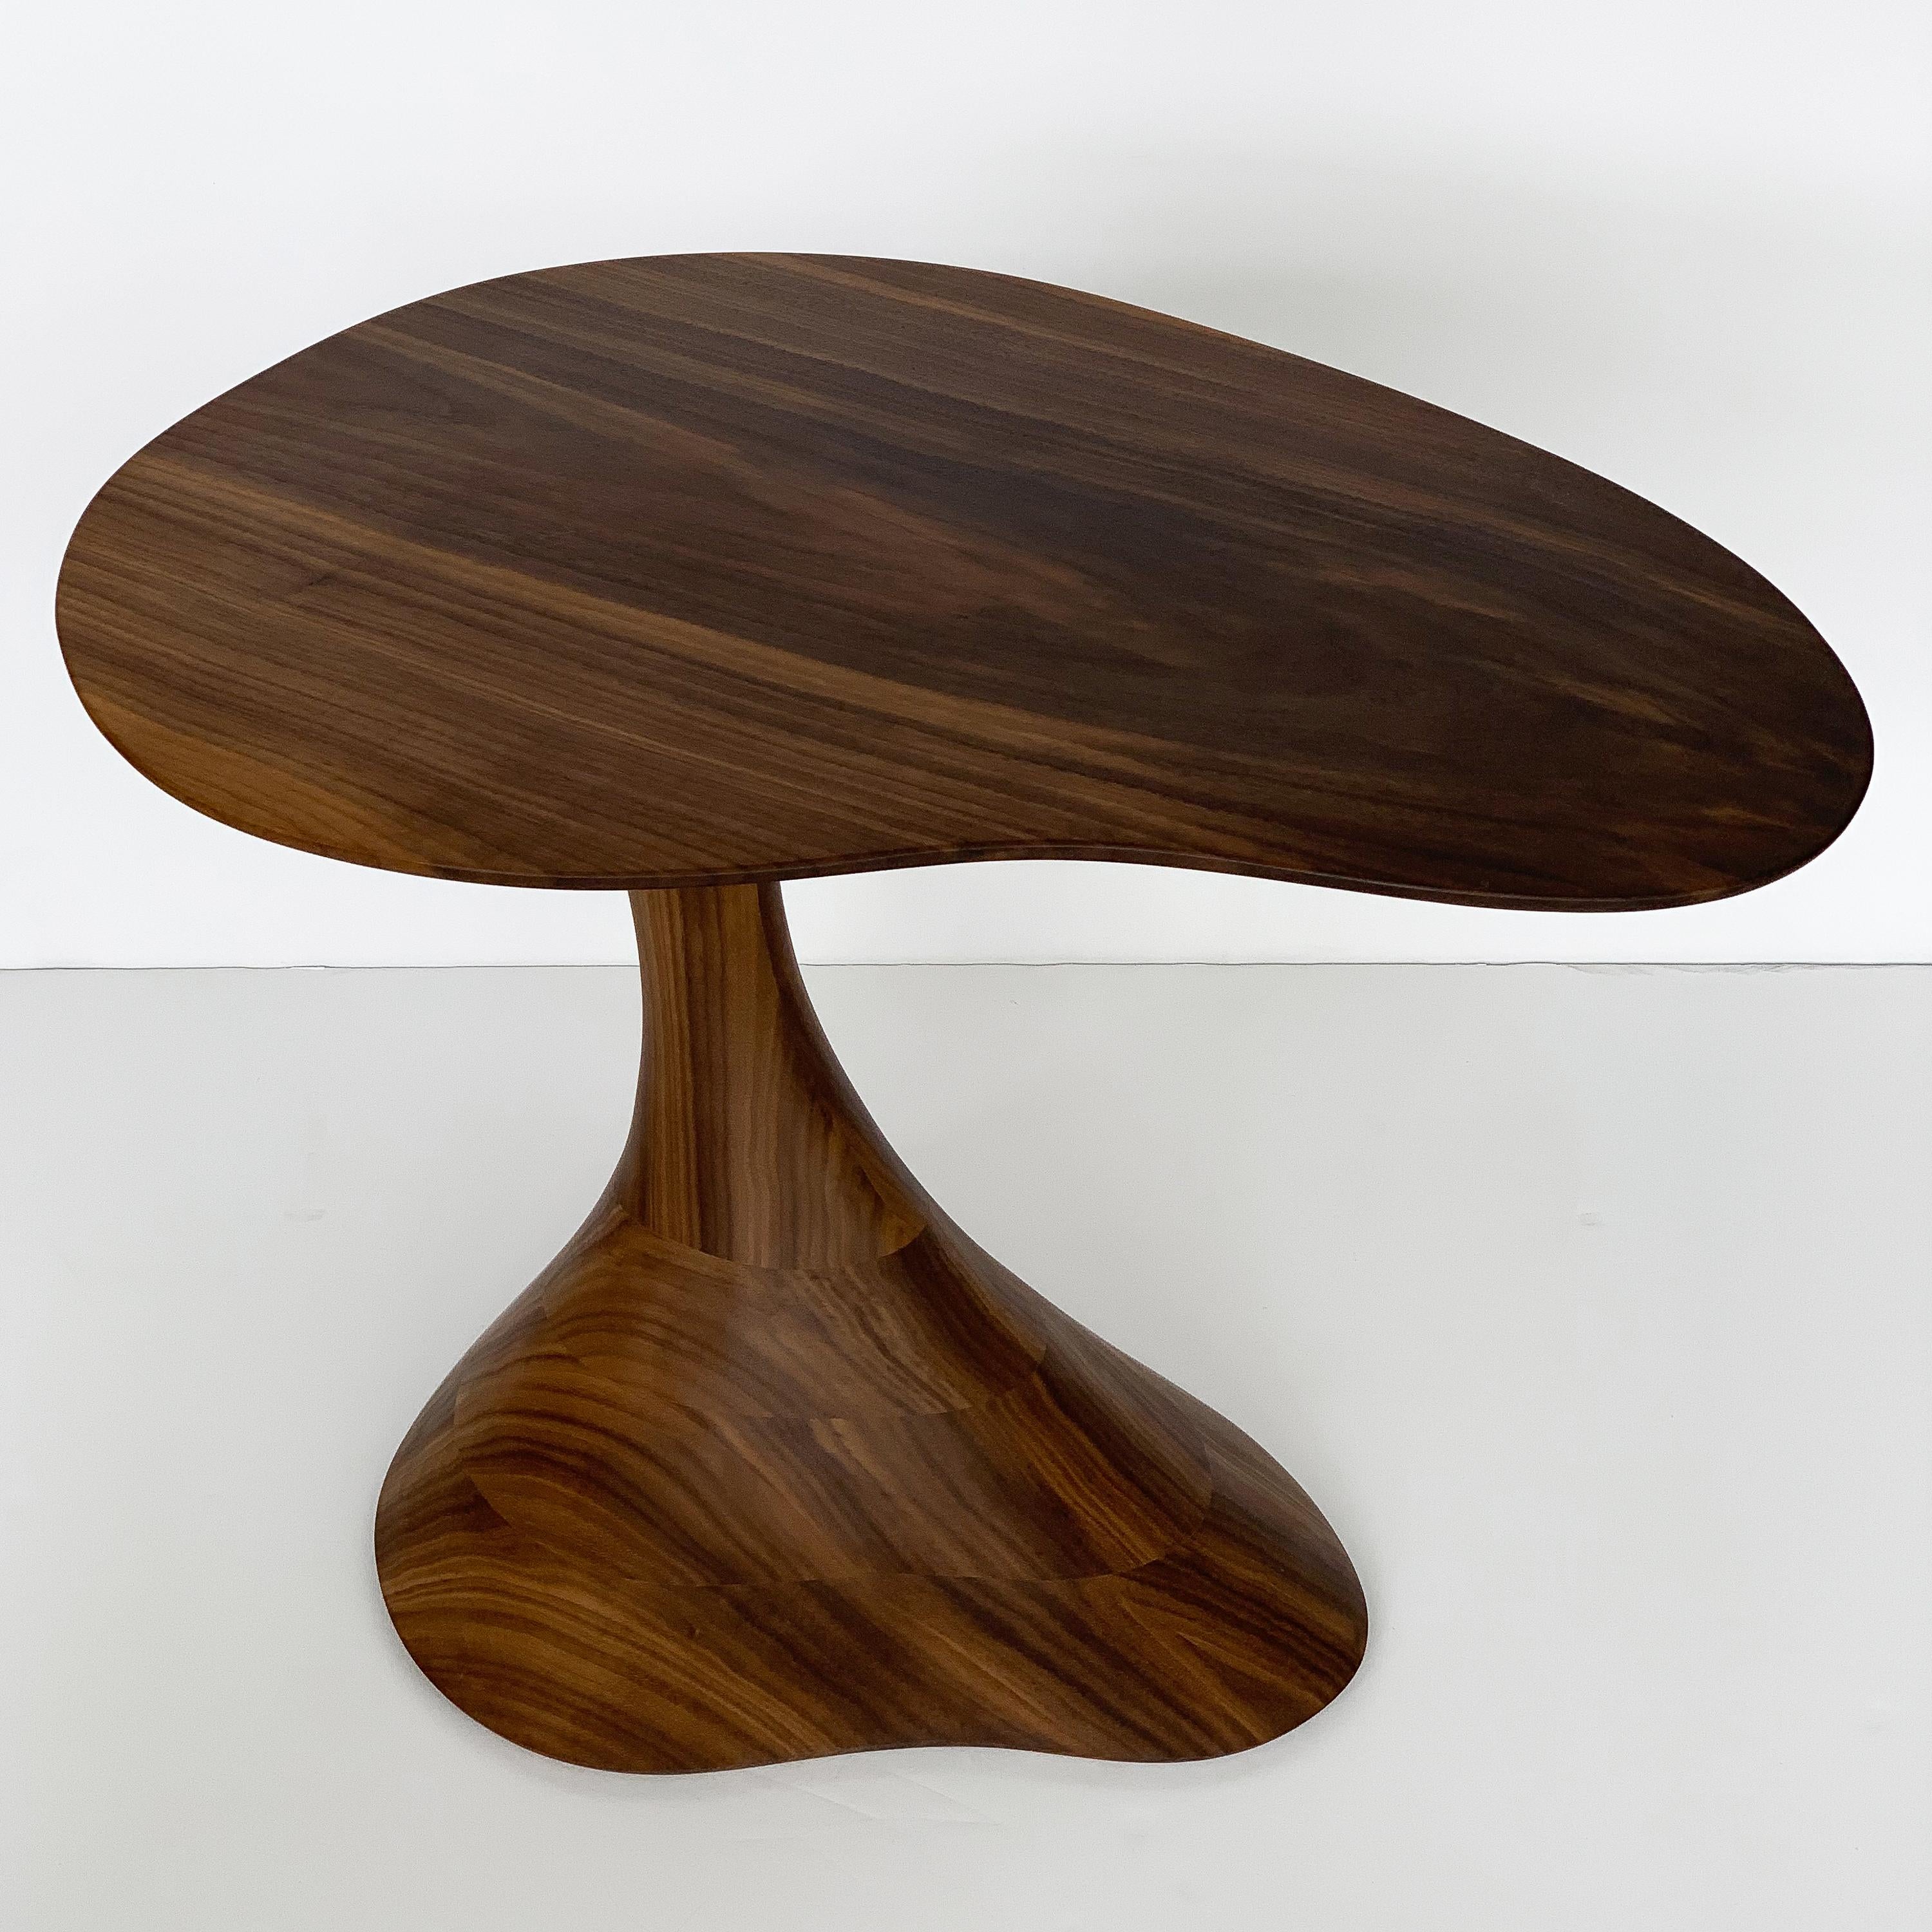 Sculptural solid walnut side tables by Morten Stenbaek. Each Pedem table is hand carved by the artist and each table is a one of a kind shape. Organic and curvaceous in form the entire table is constructed from solid walnut and oil finished.